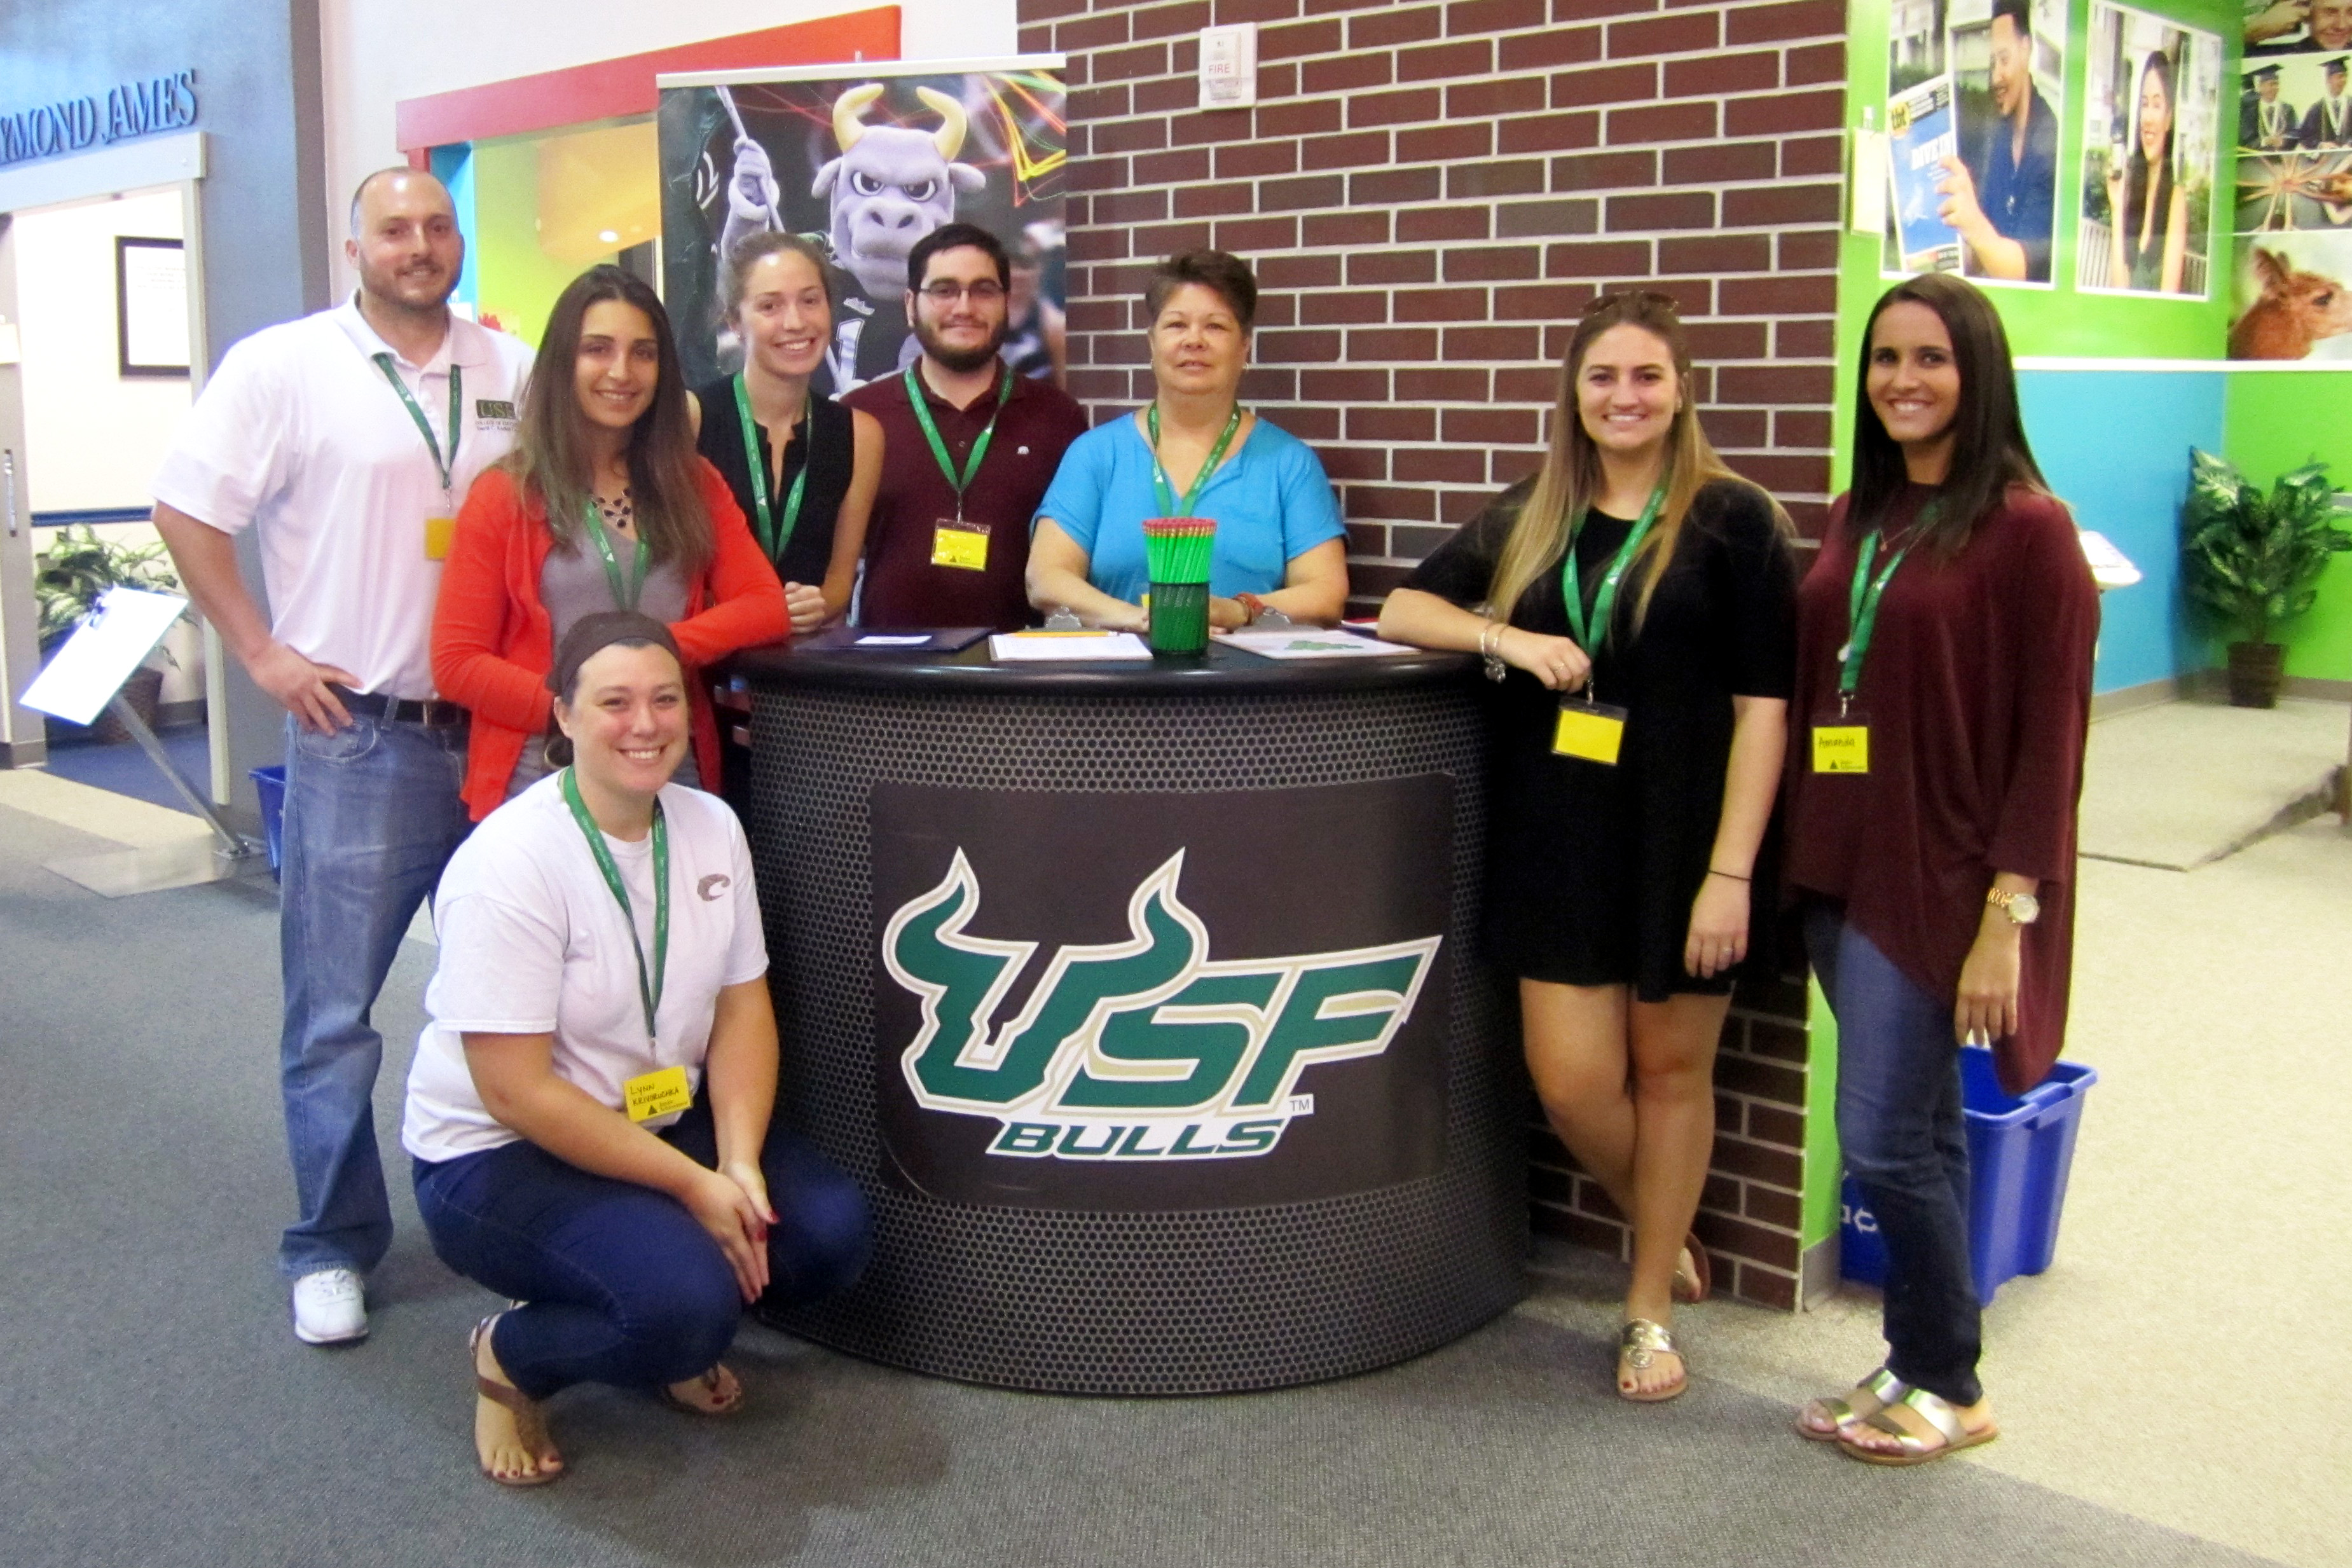 Students in the USF College of Education Master of Arts in Teaching Program at Junior Achievement BizTown